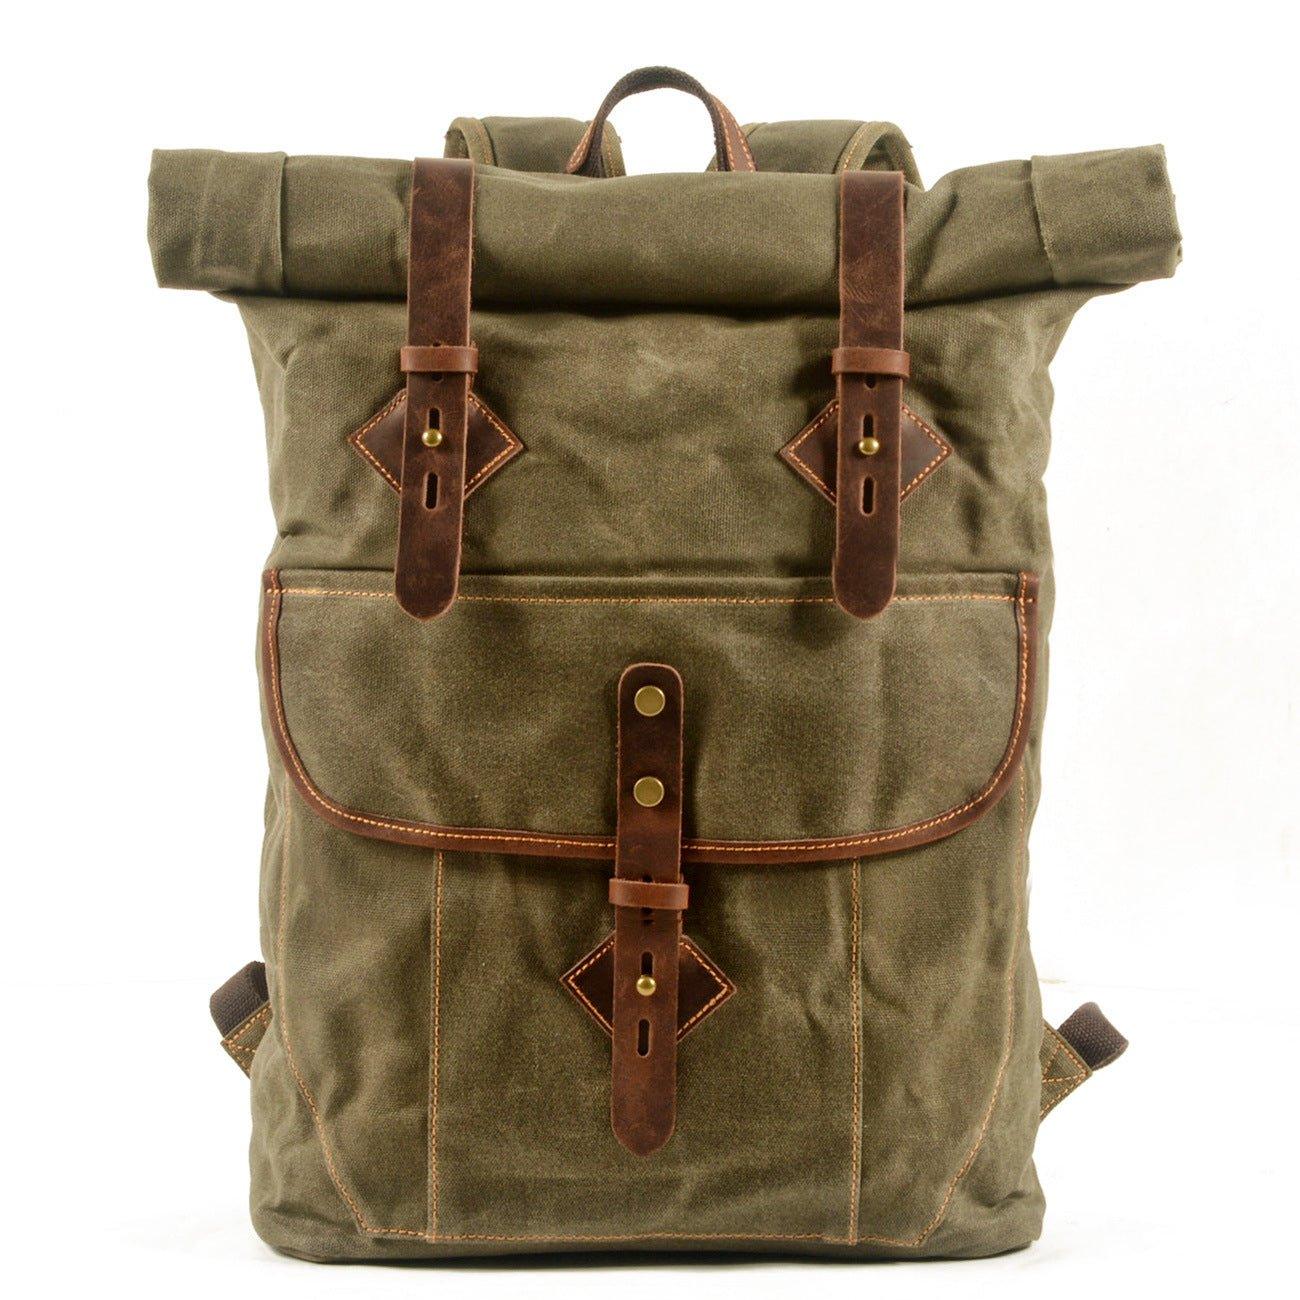 Waxed Canvas Roll Top Backpack Vintage with Laptop Sleeve - Woosir